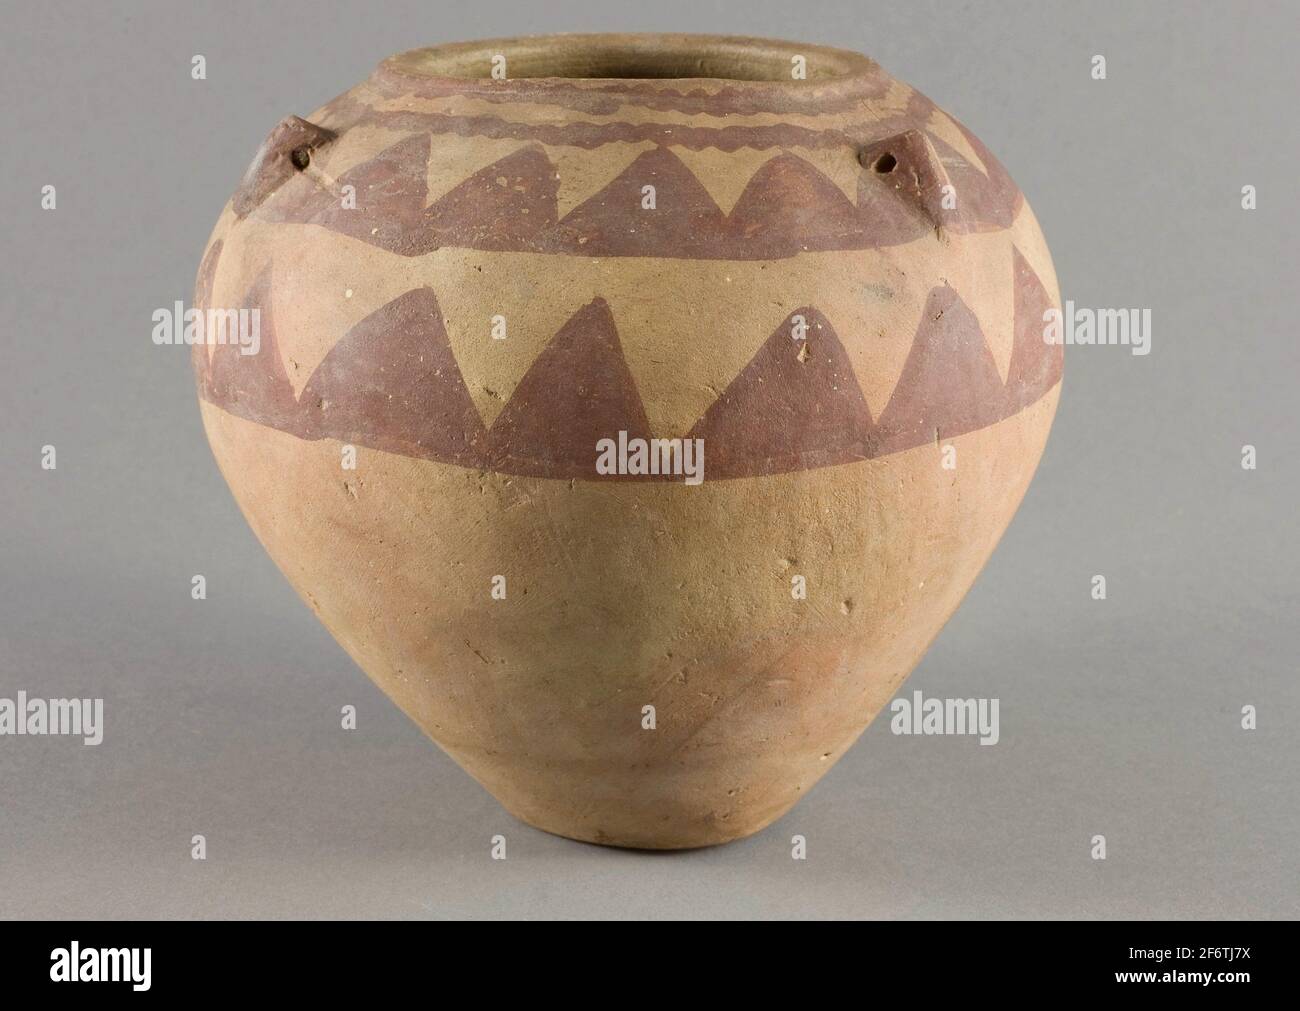 Author: Ancient Egyptian. Vessel - Predynastic Period, Naqada II (about 3800 - 3300 BC) - Egyptian. Ceramic and pigment. 3800 BC - 3300 BC. Stock Photo